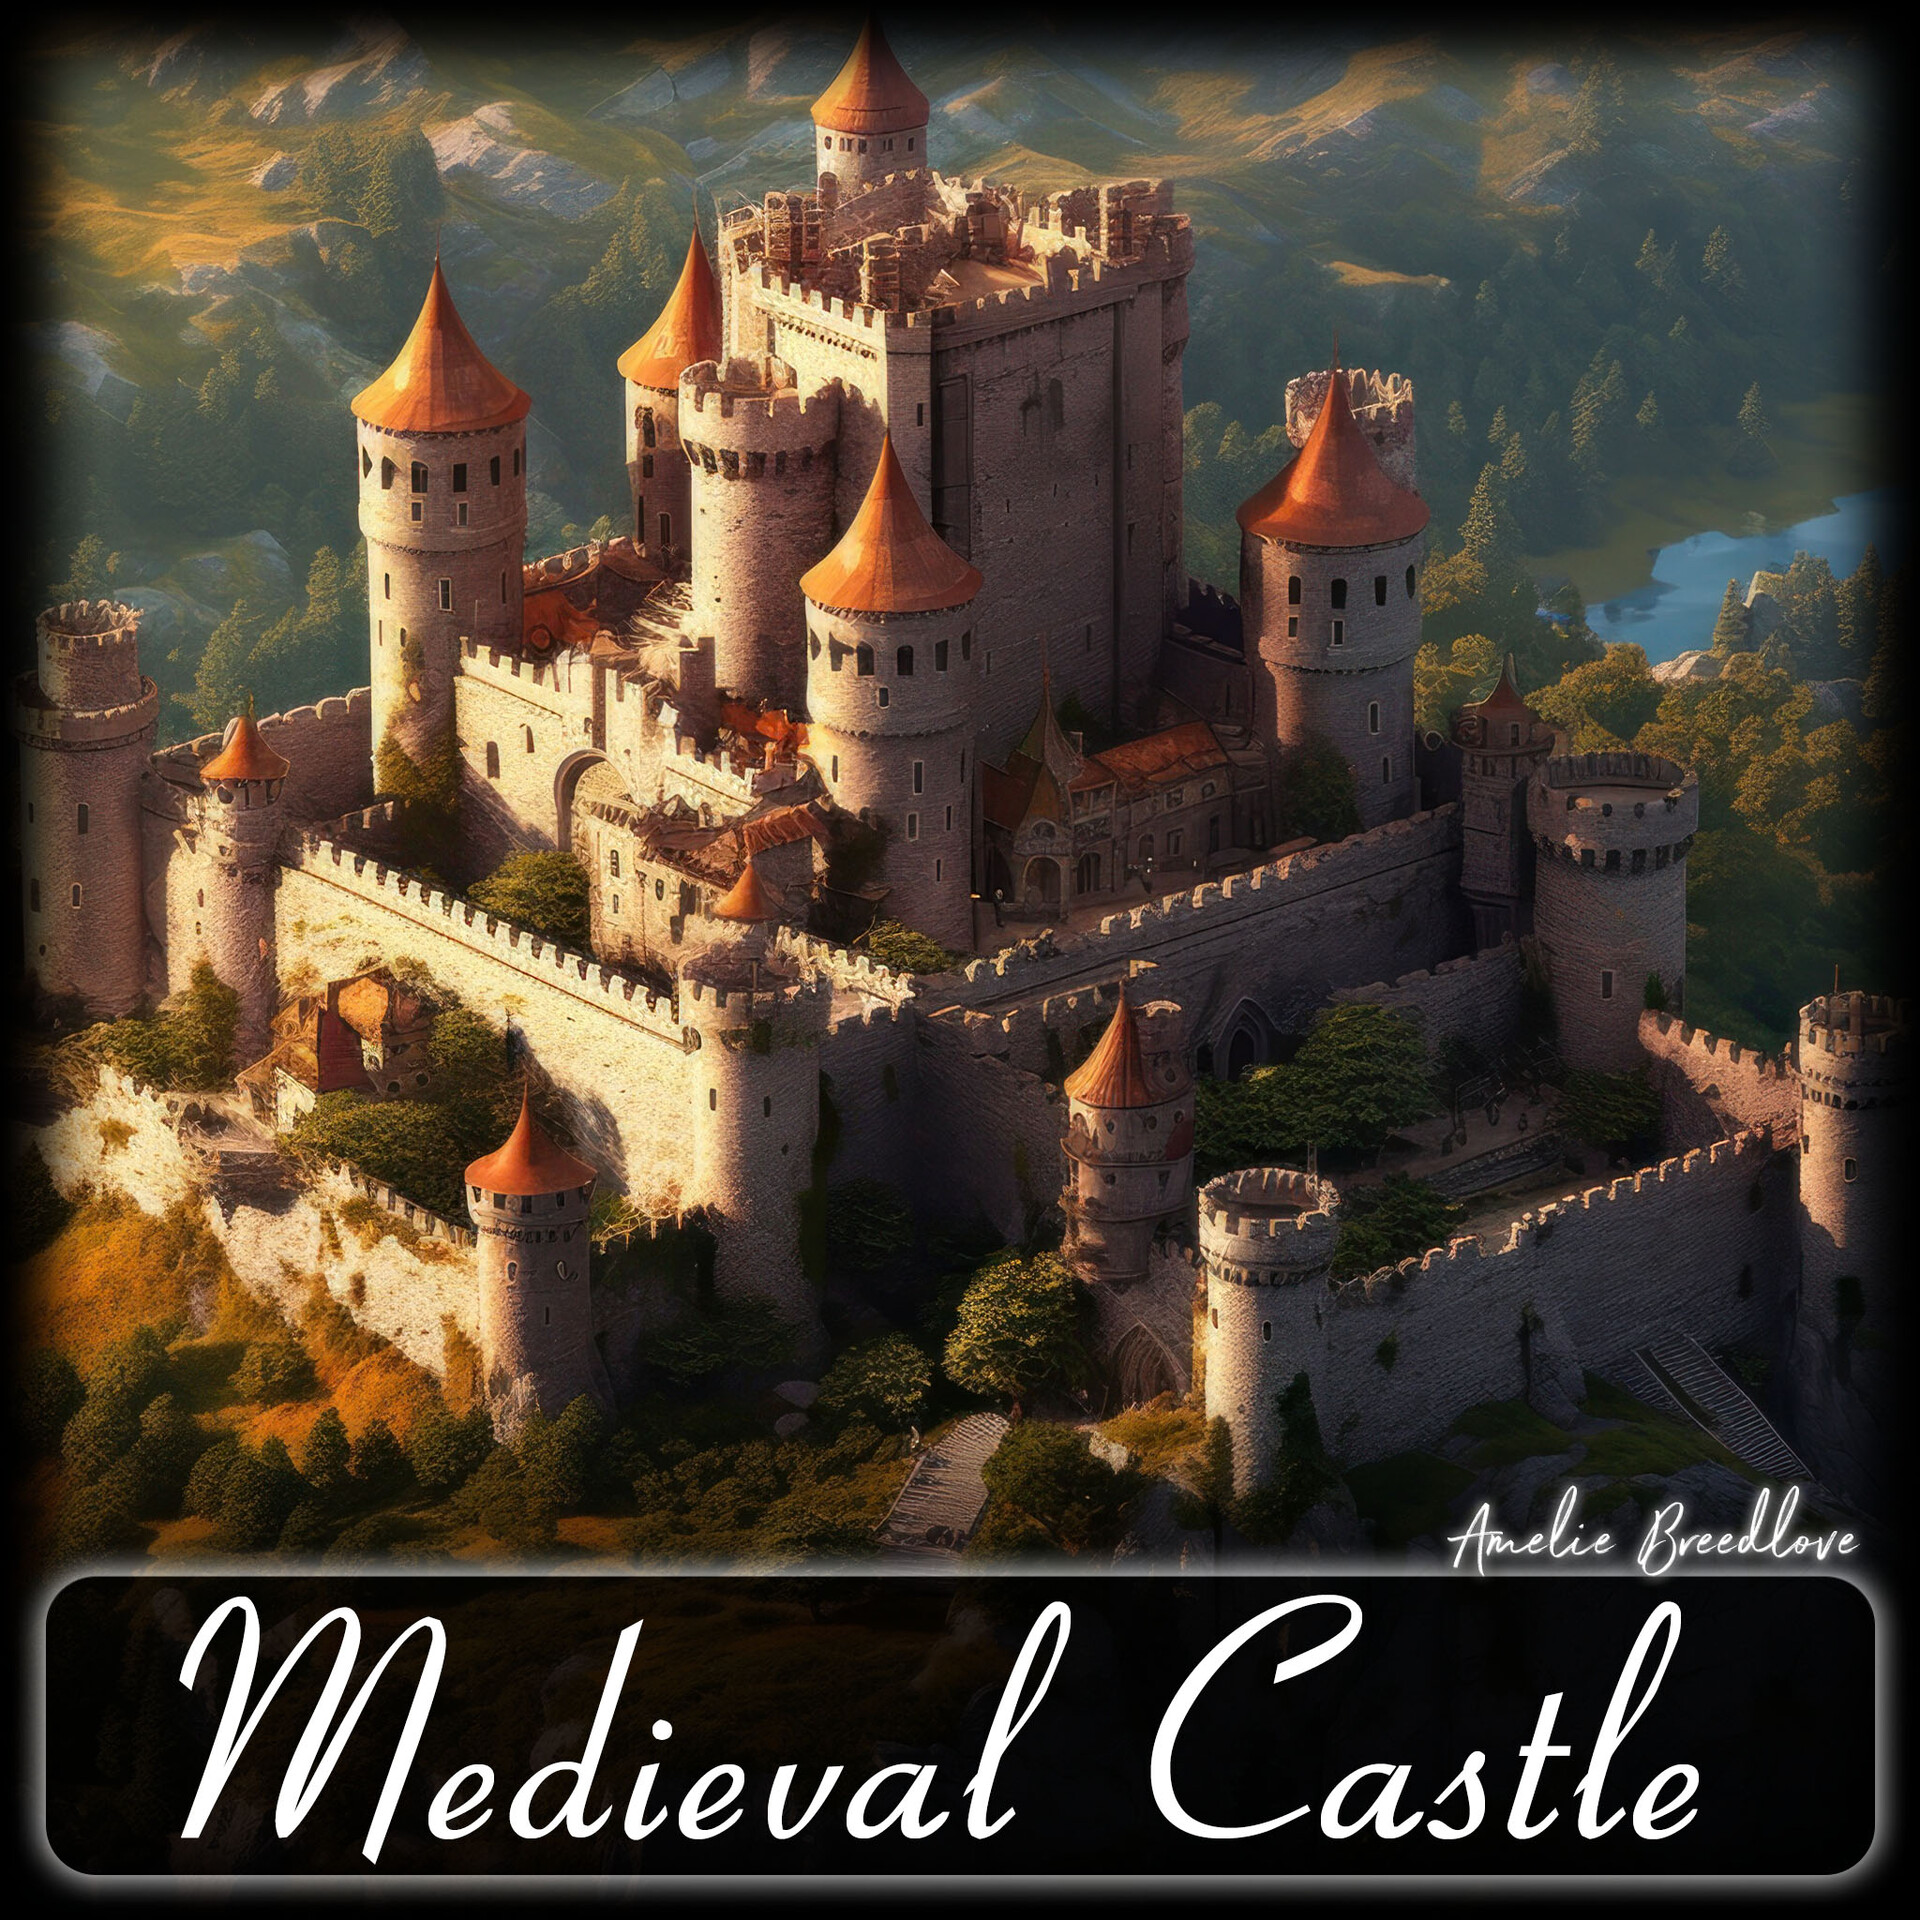 Environment medieval. This is a concept art of a Medieval castle